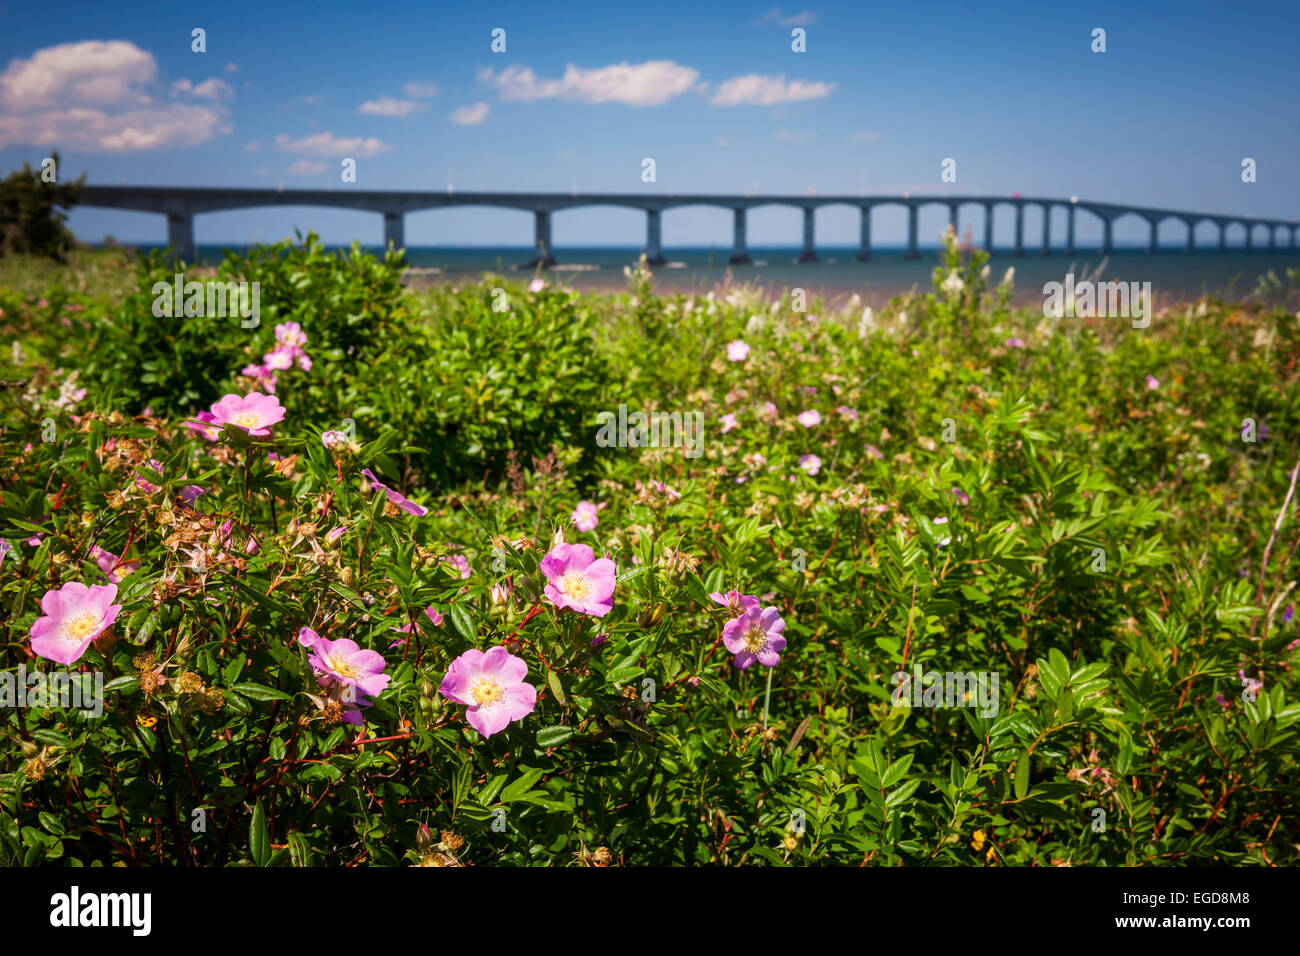 Closeup of wild rose flowers at New Brunswick, Canada coast with Confederation Bridge in background Stock Photo